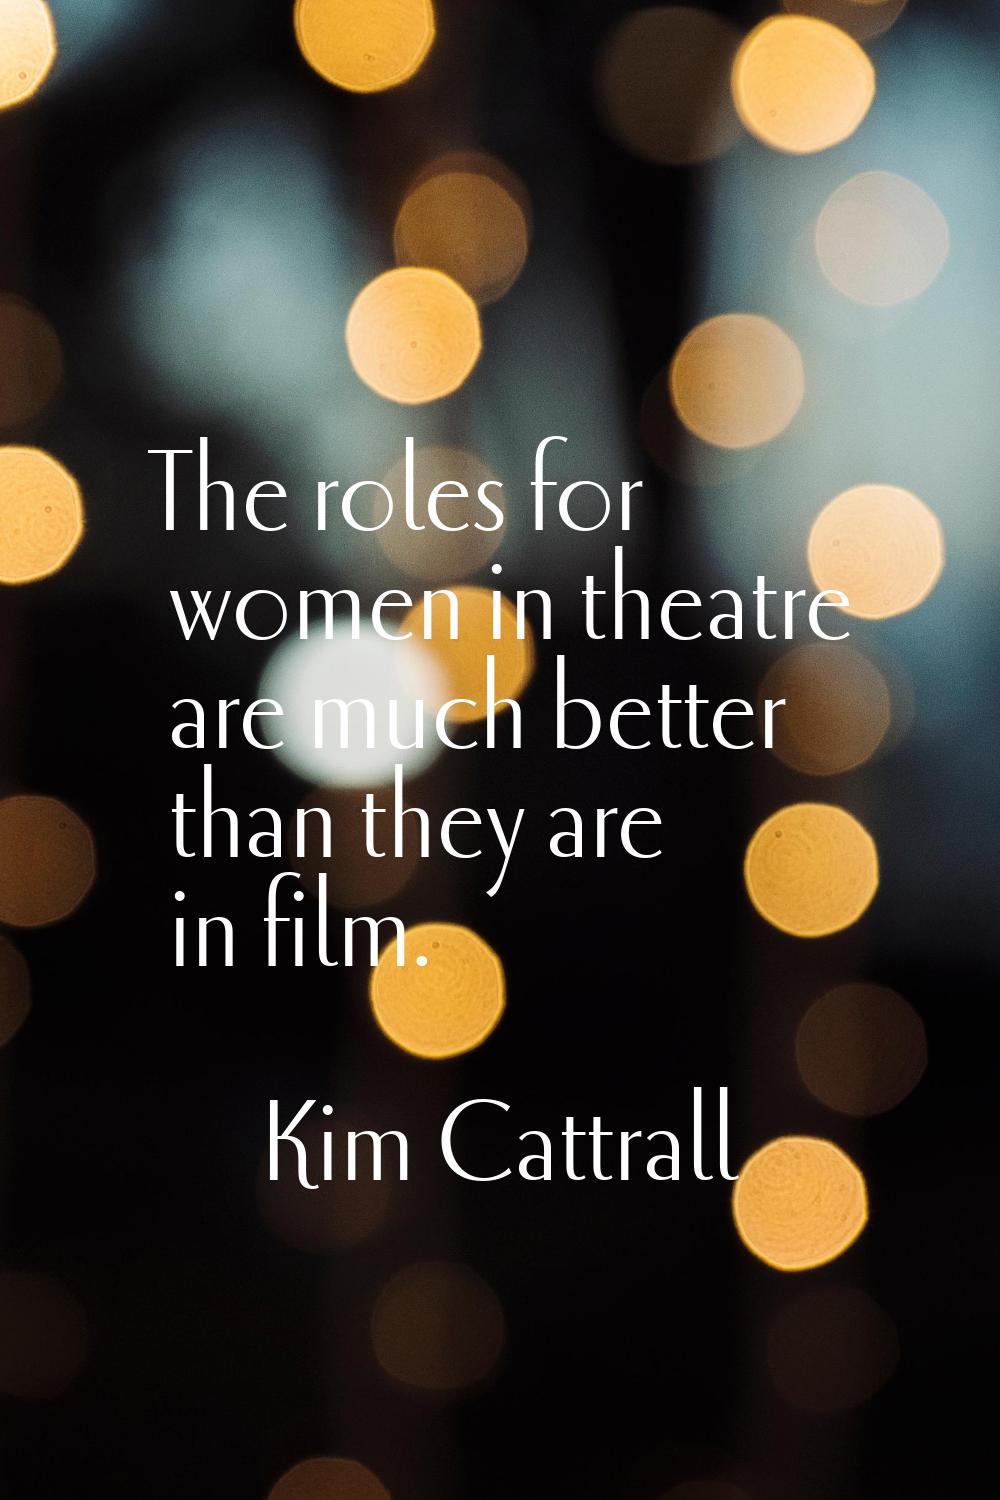 The roles for women in theatre are much better than they are in film.